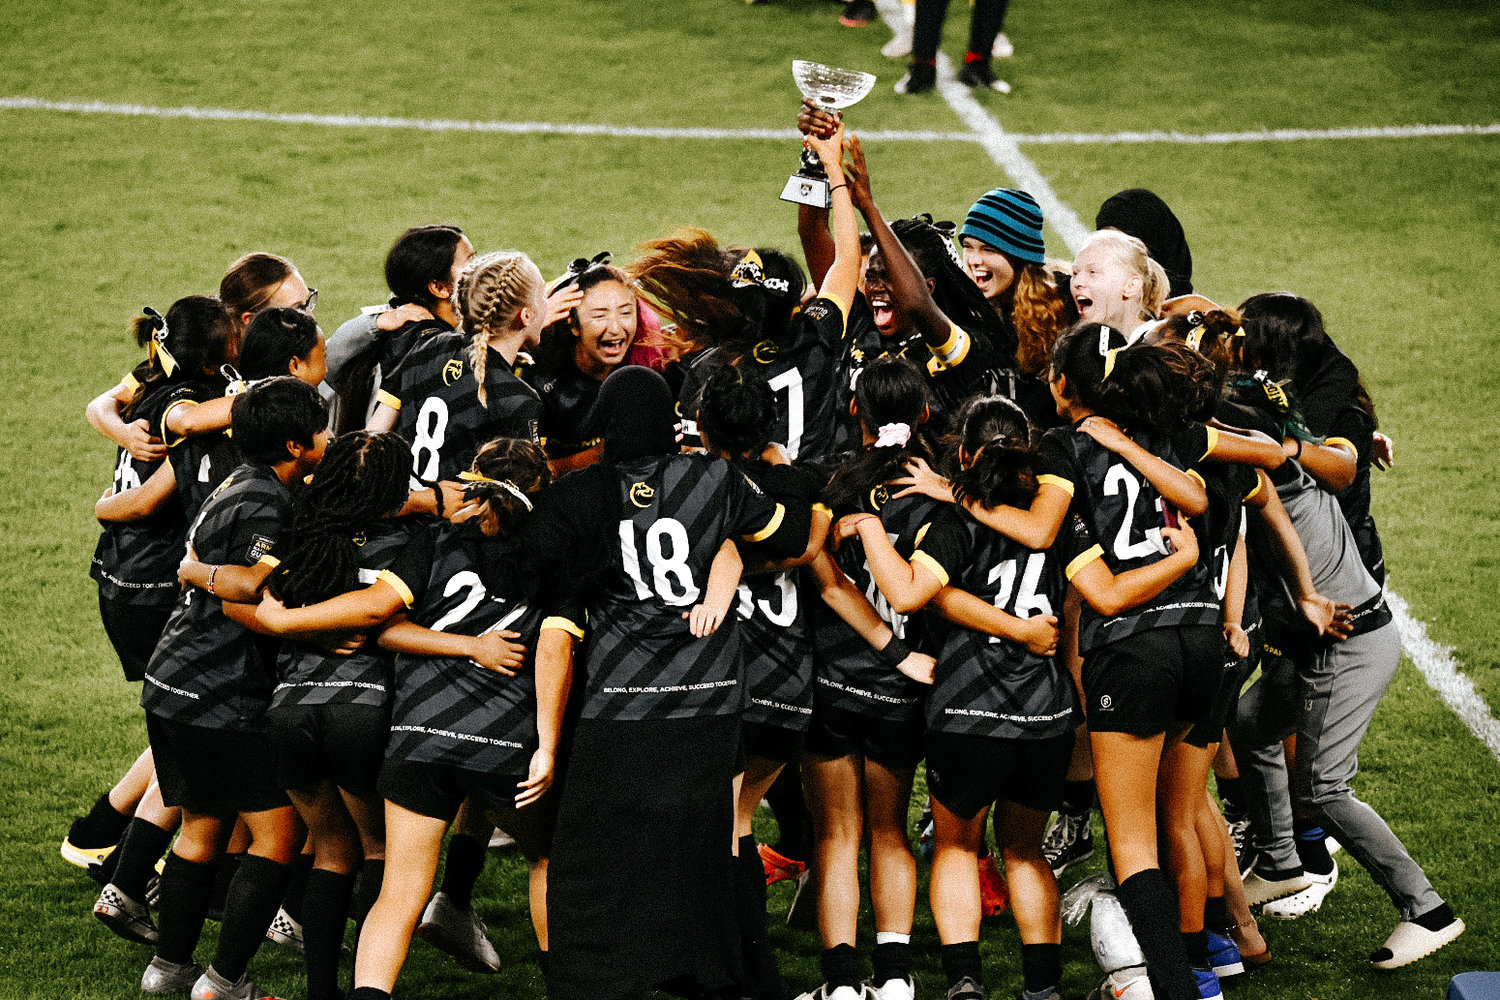 The Como girls soccer team celebrating with the Mayor’s Cup after receiving it from St. Paul Mayor Melvin Carter on Friday, Oct. 8, 2021. (Photo by Wil Galvez)